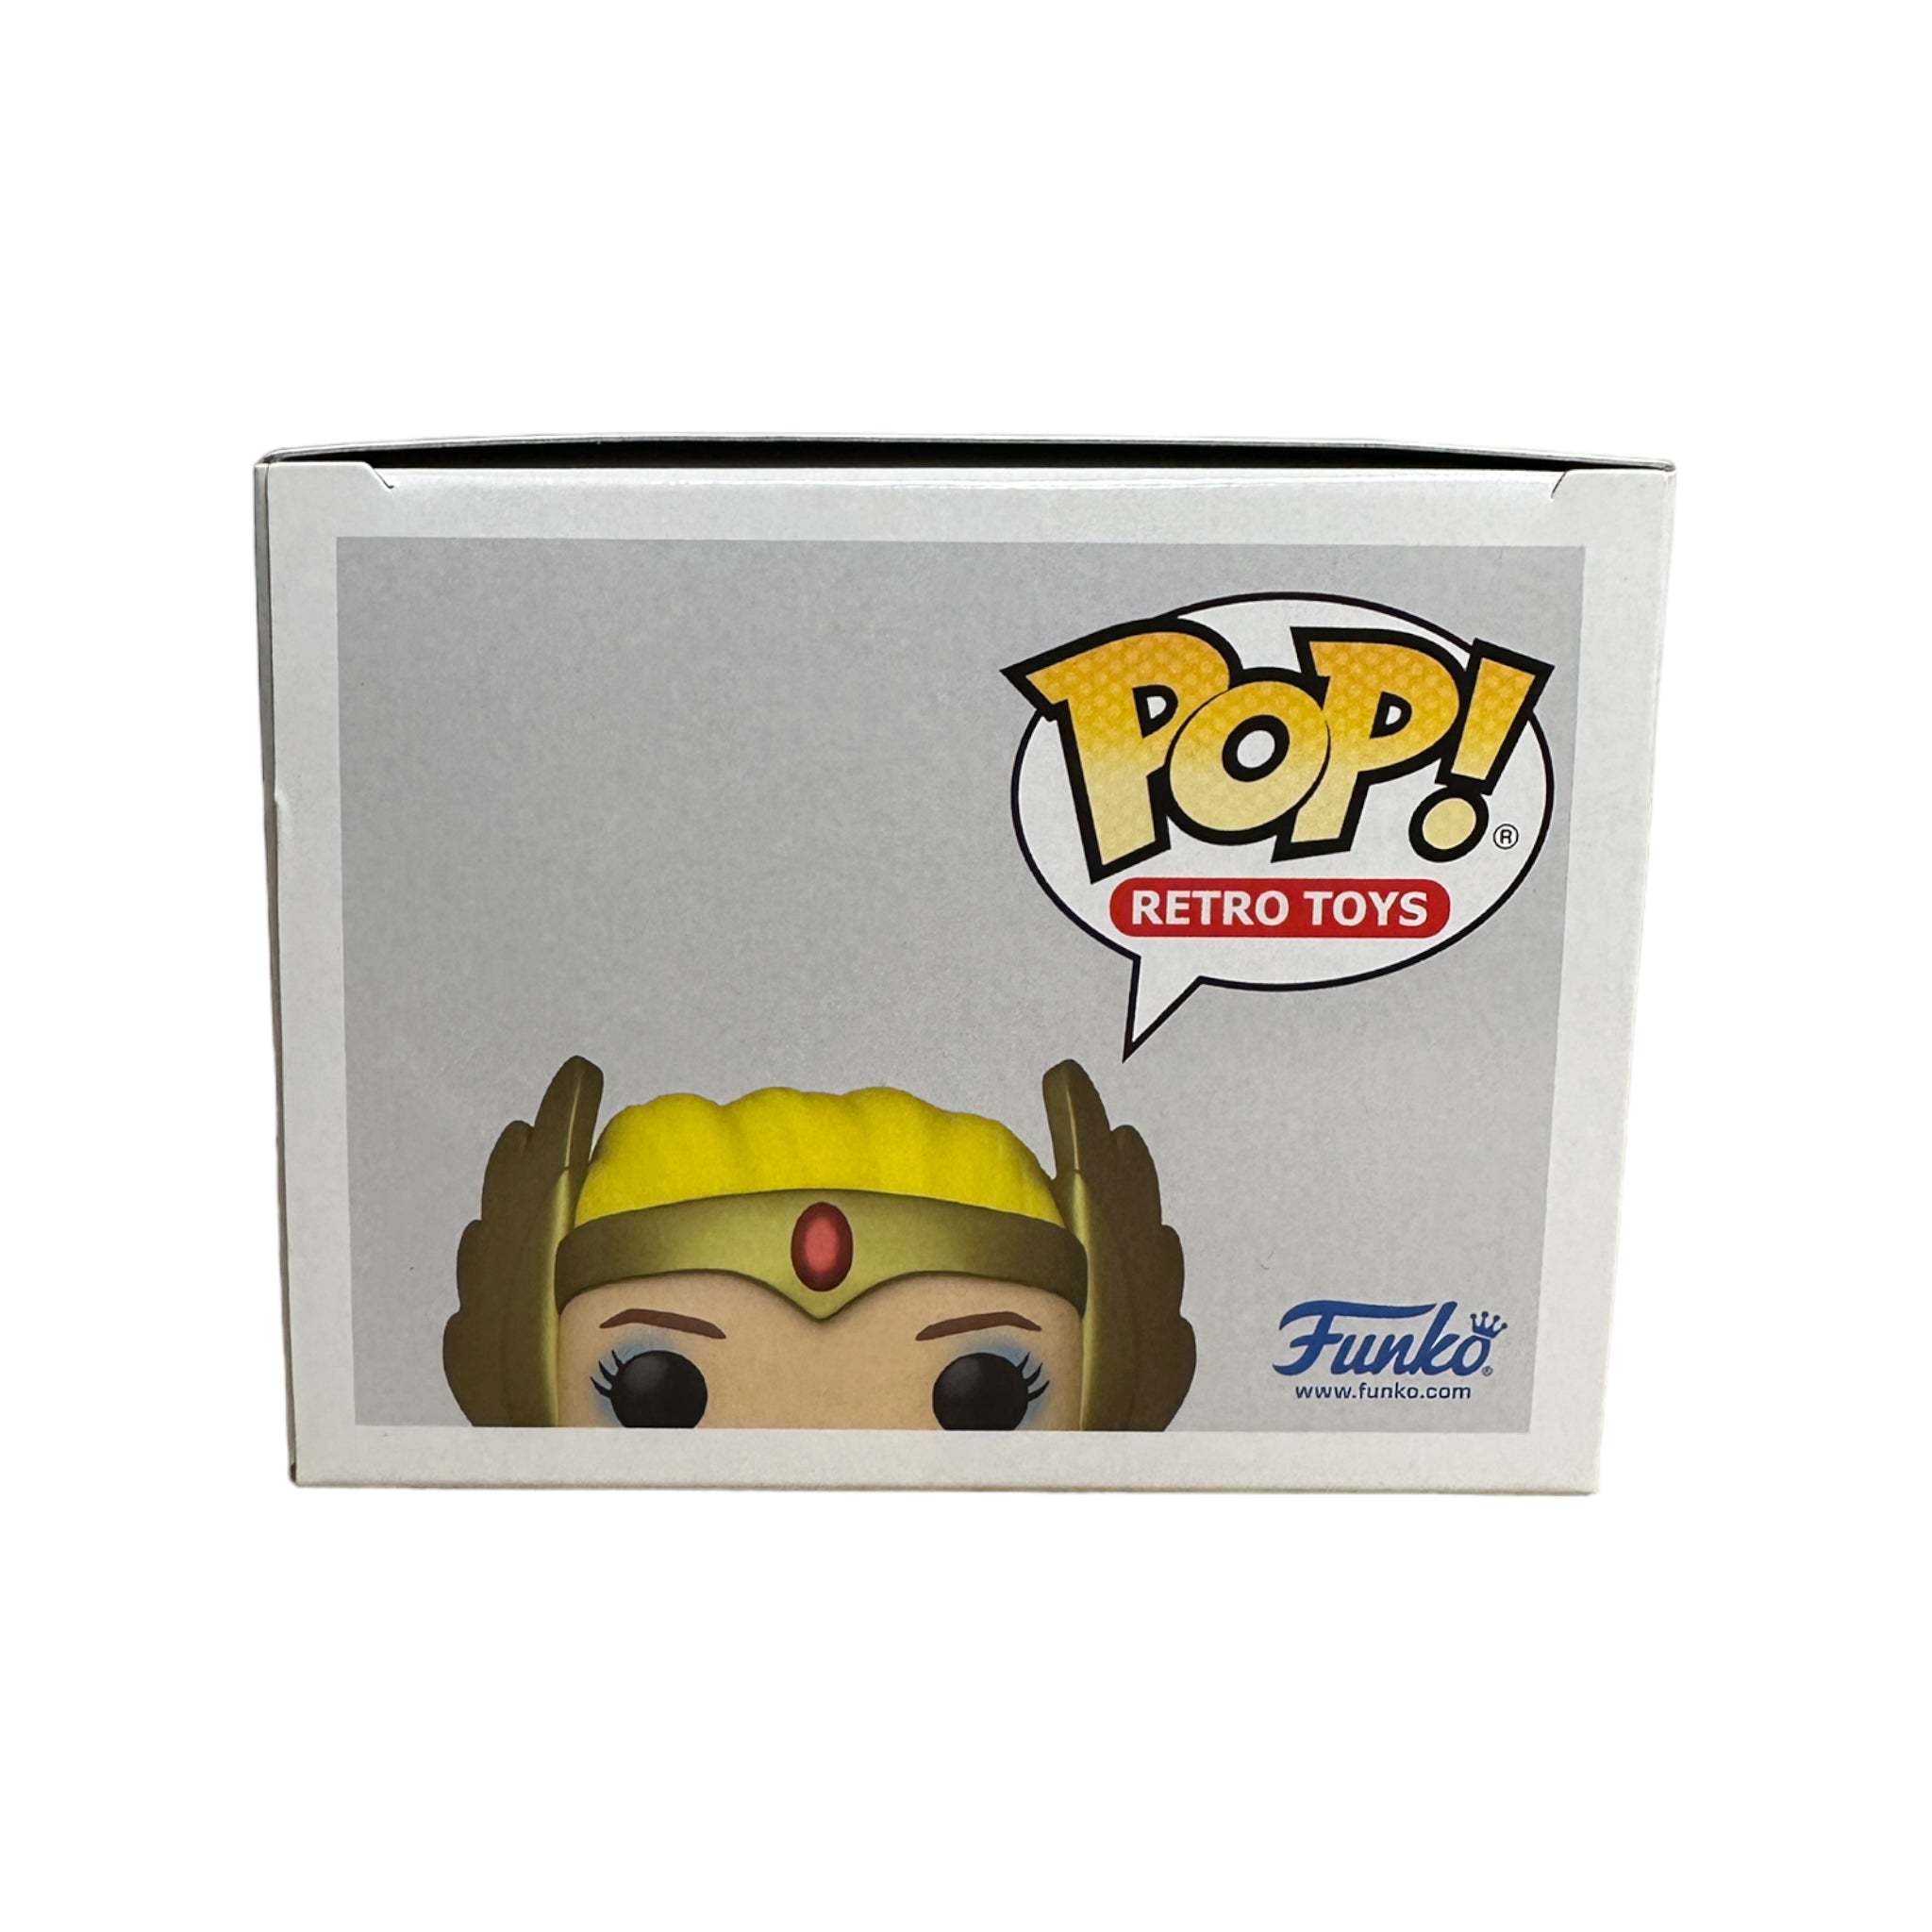 She-Ra #38 (Metallic) Funko Pop! - Masters of The Universe - Wonder Con 2022 Shared Exclusive - Condition 8.75/10